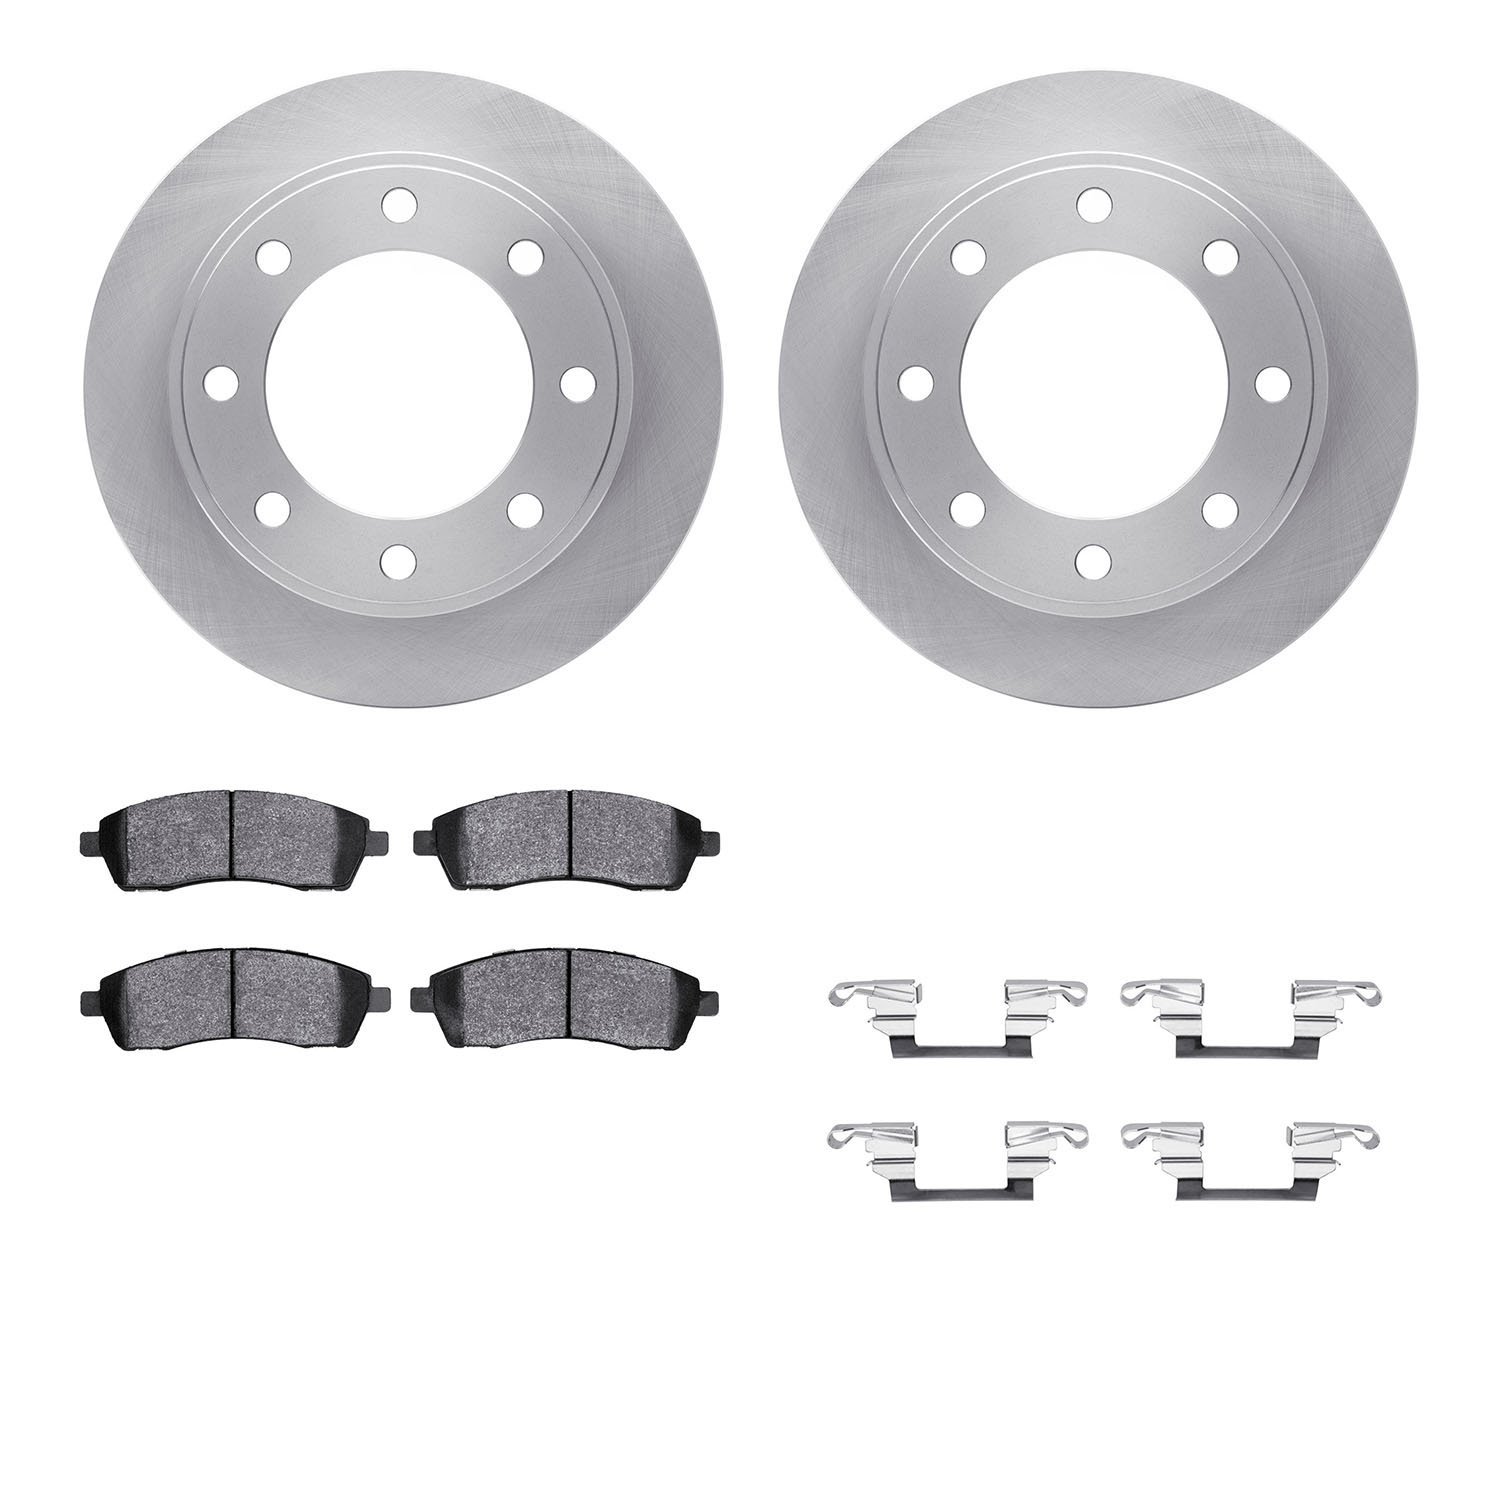 6412-54140 Brake Rotors with Ultimate-Duty Brake Pads Kit & Hardware, 1999-2005 Ford/Lincoln/Mercury/Mazda, Position: Rear